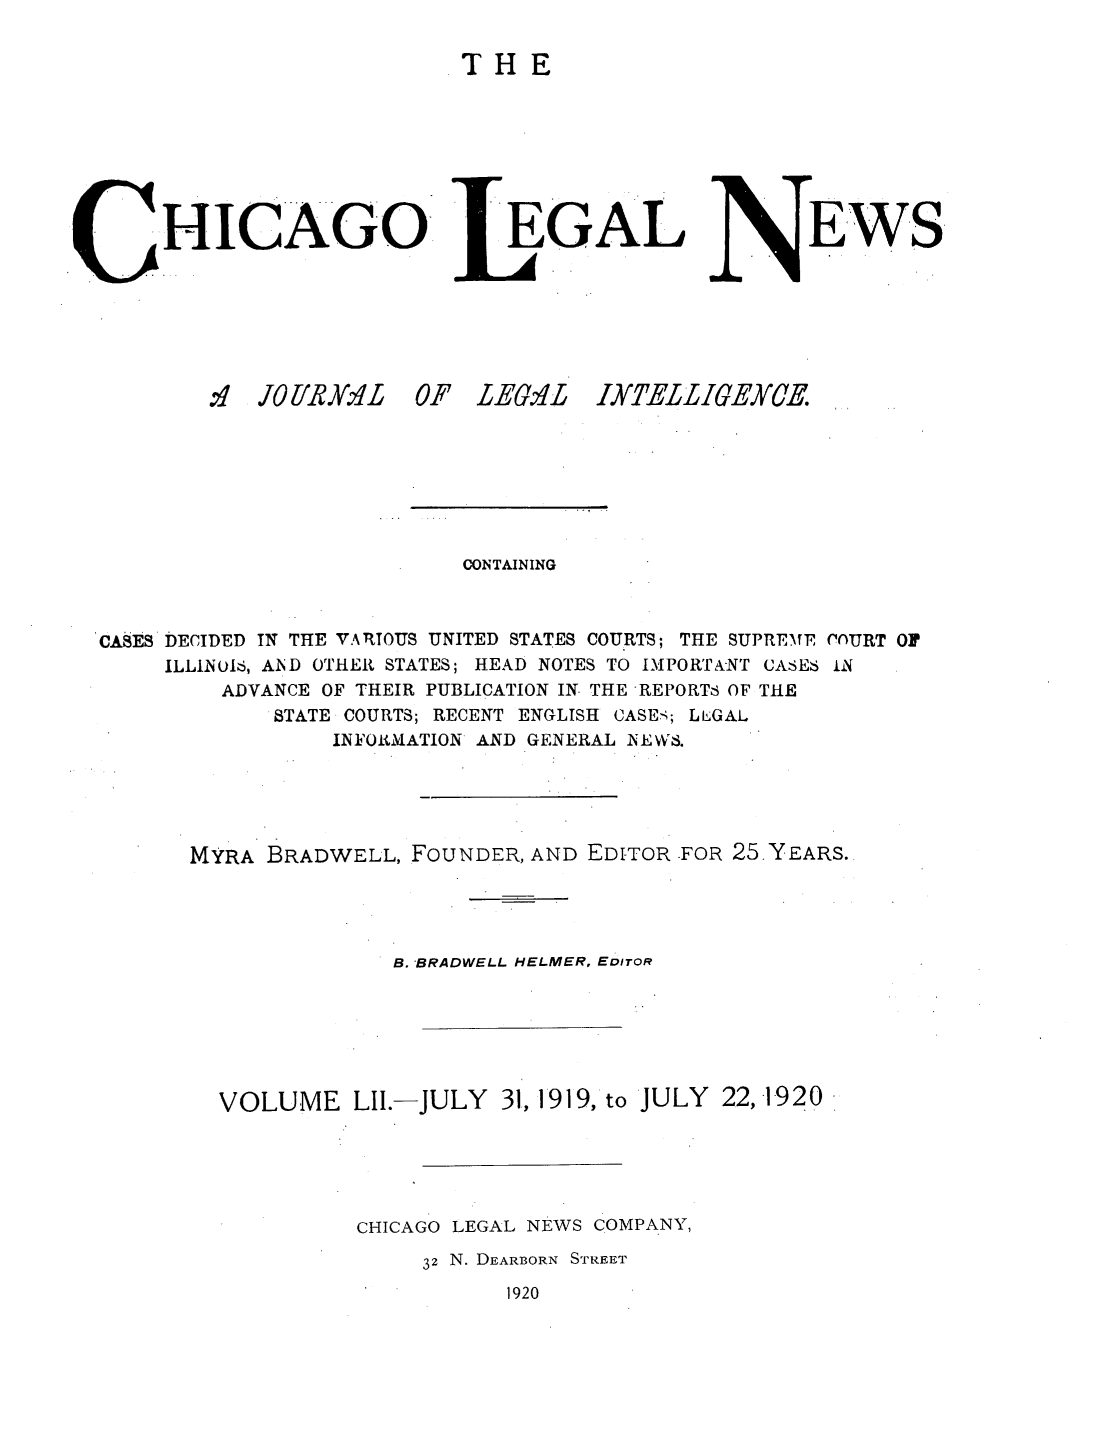 handle is hein.journals/chiclene52 and id is 1 raw text is: THEHICAGO:4 JOE/R Y.4 L 0EGALF LEG.4LEWS,CONTAININGCASES DECIDED IN THE VARTOUS UNITED STATES COURTS; THE SUPREMF, COURT OFILLINUIS, A1ND OTHER STATES; HEAD NOTES TO IMPORTANT CASES INADVANCE OF THEIR PUBLICATION IN- THE -REPORTS OF THESTATE COURTS; RECENT ENGLISH CASEs; LLGALINFORMATION AND GENERAL NEWS.MYRA BRADWELL, FOUNDER, AND EDITOR .FOR 25 YEARS.B. BRADWELL HELMER, EDITORVOLUME LII.-JULY 31, 1919, to JULY 22,1-920CHICAGO LEGAL NEWS COMPANY,32 N. DEARBORN STRErET1920IXTELLIGEXCE.